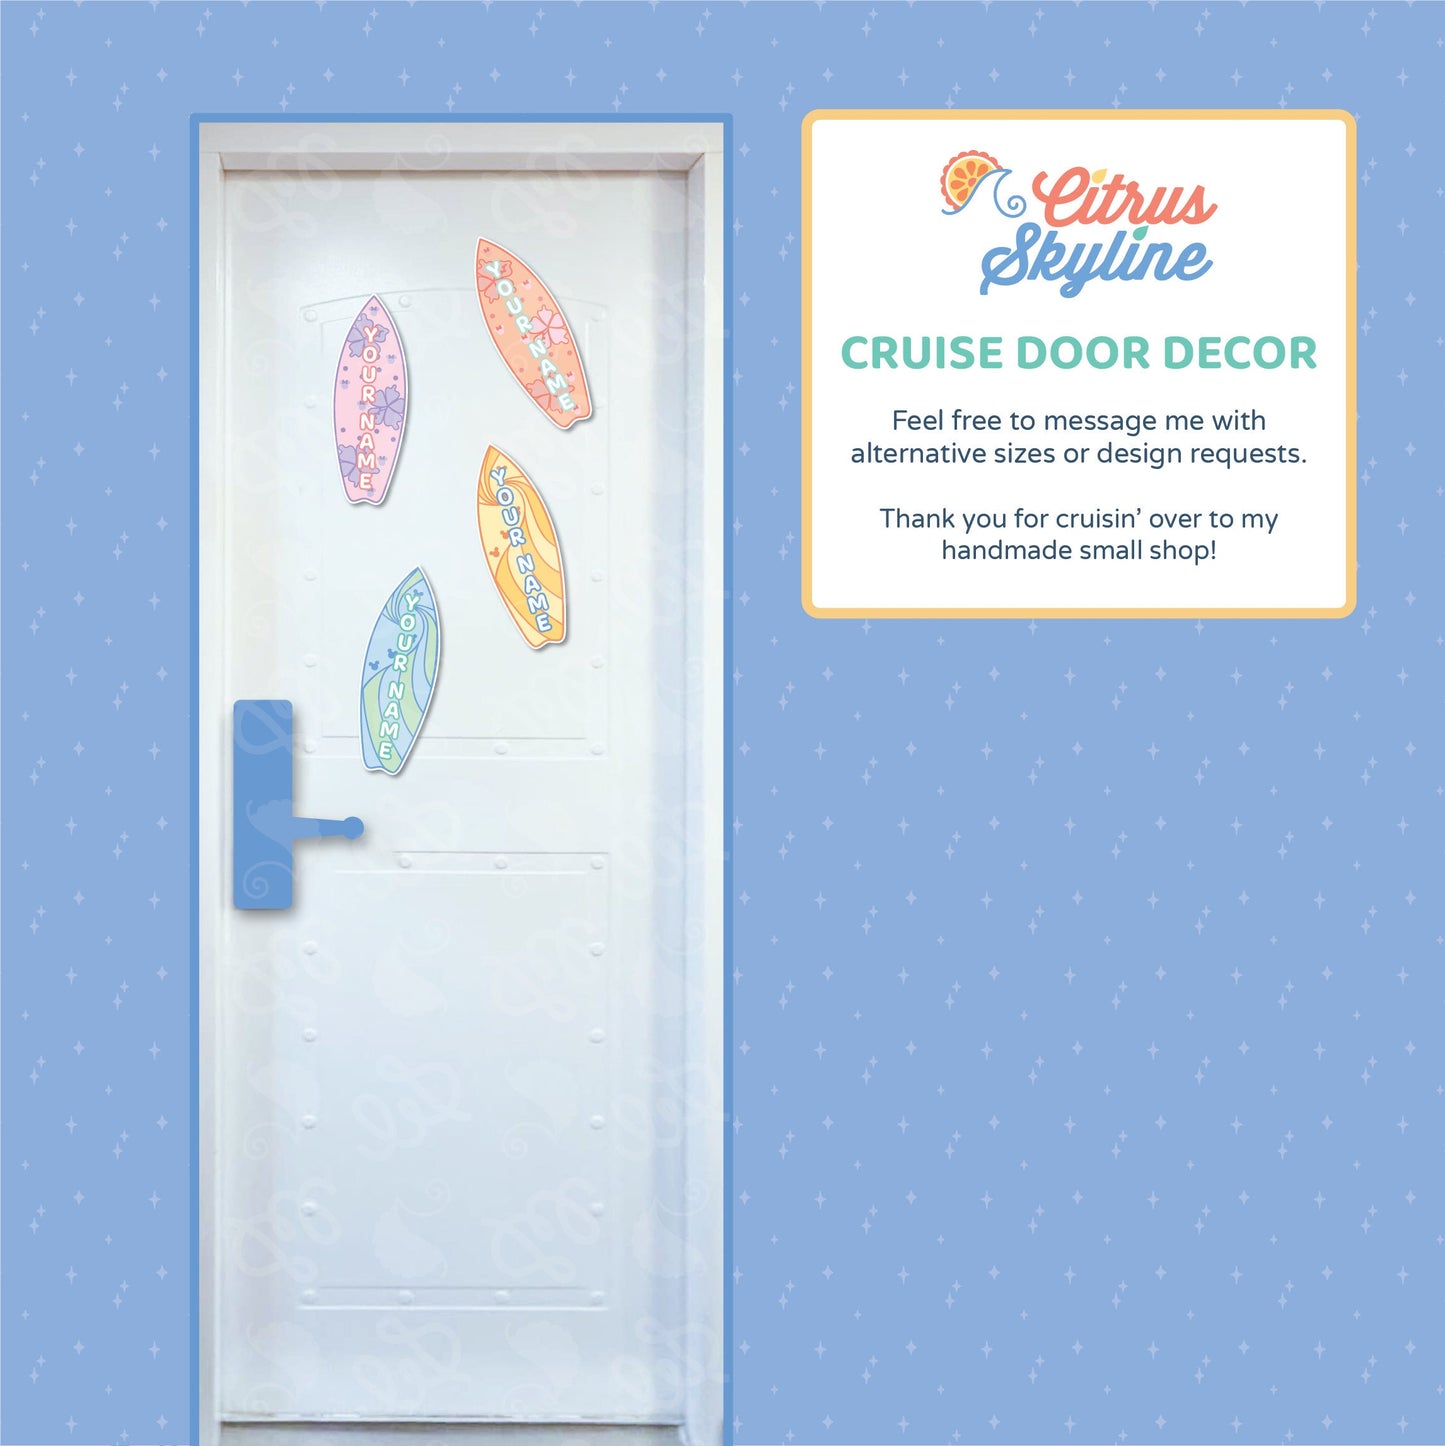 Personalizable Beach Surf Boards DCL Cruise Magnets with Hidden Mickey and Minnie Designs